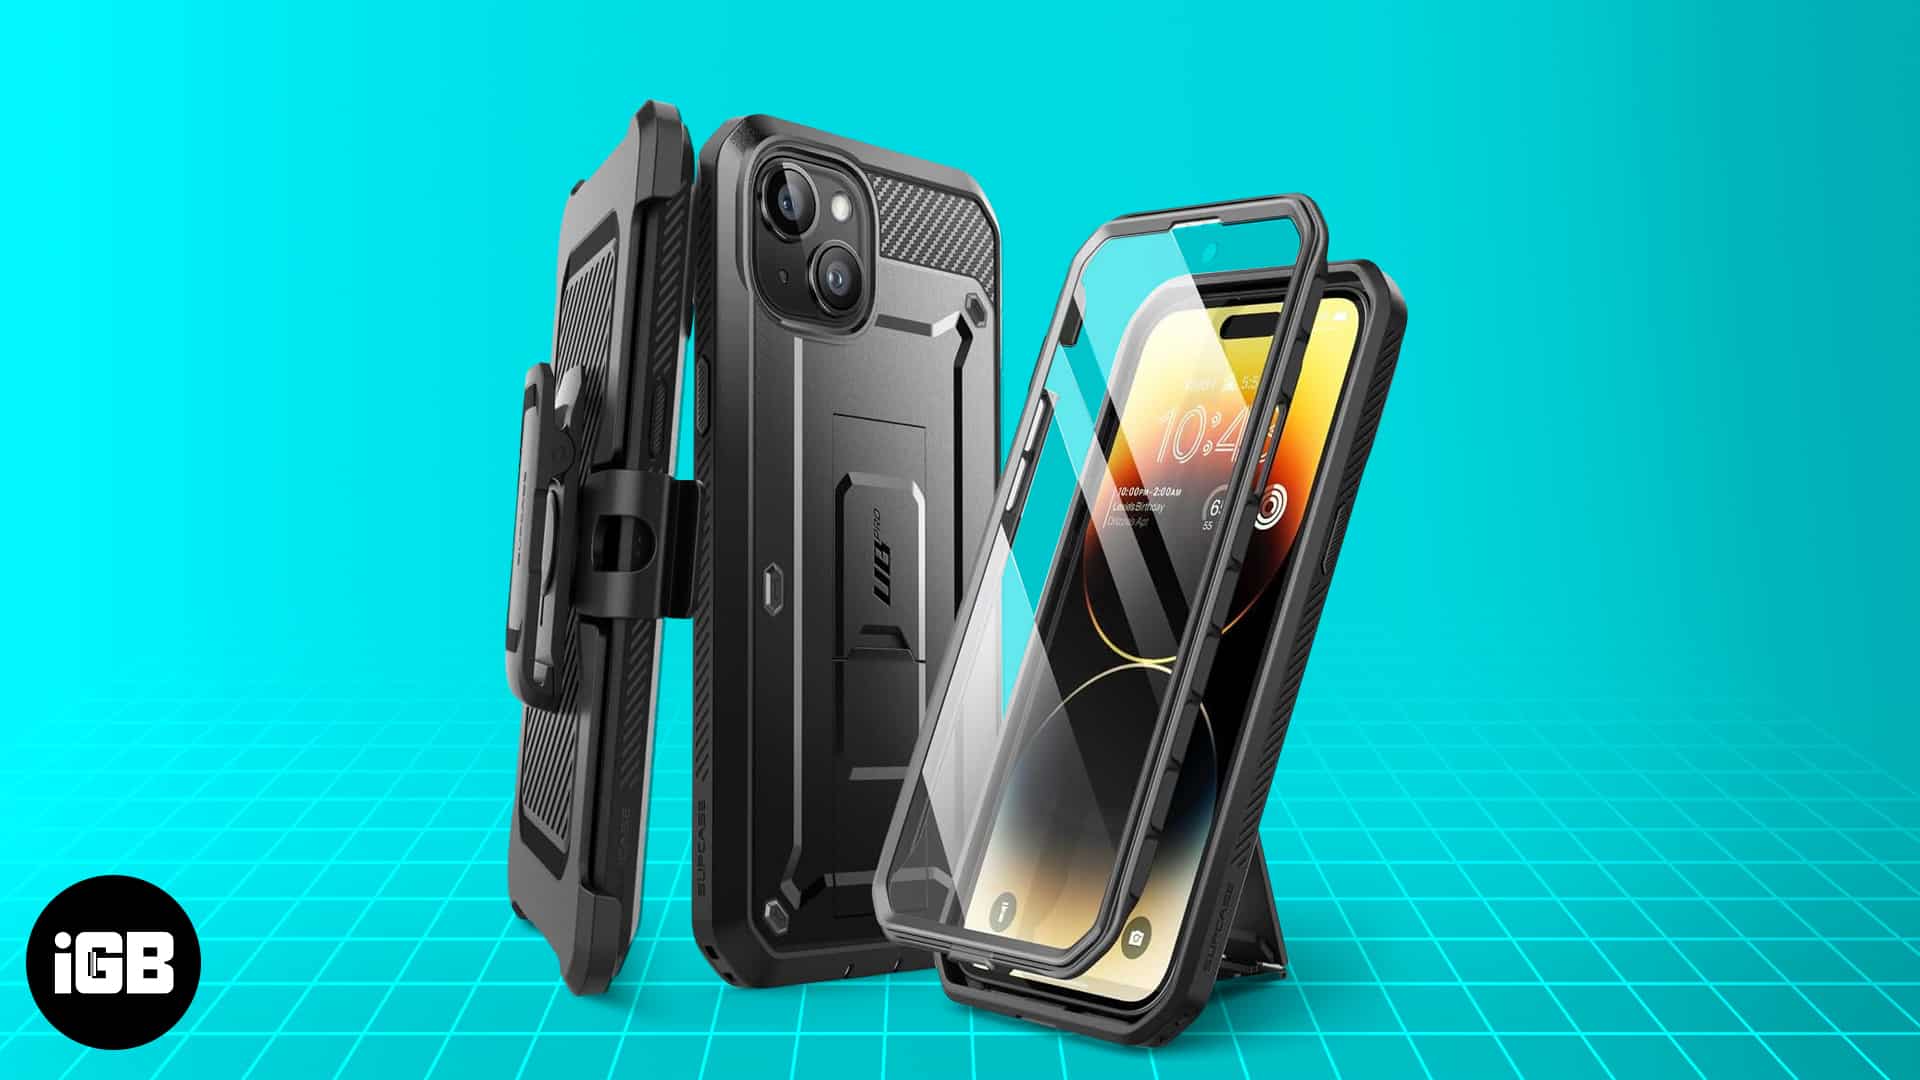 iPhone 15 Plus Waterproof Case with Belt Clip Holster